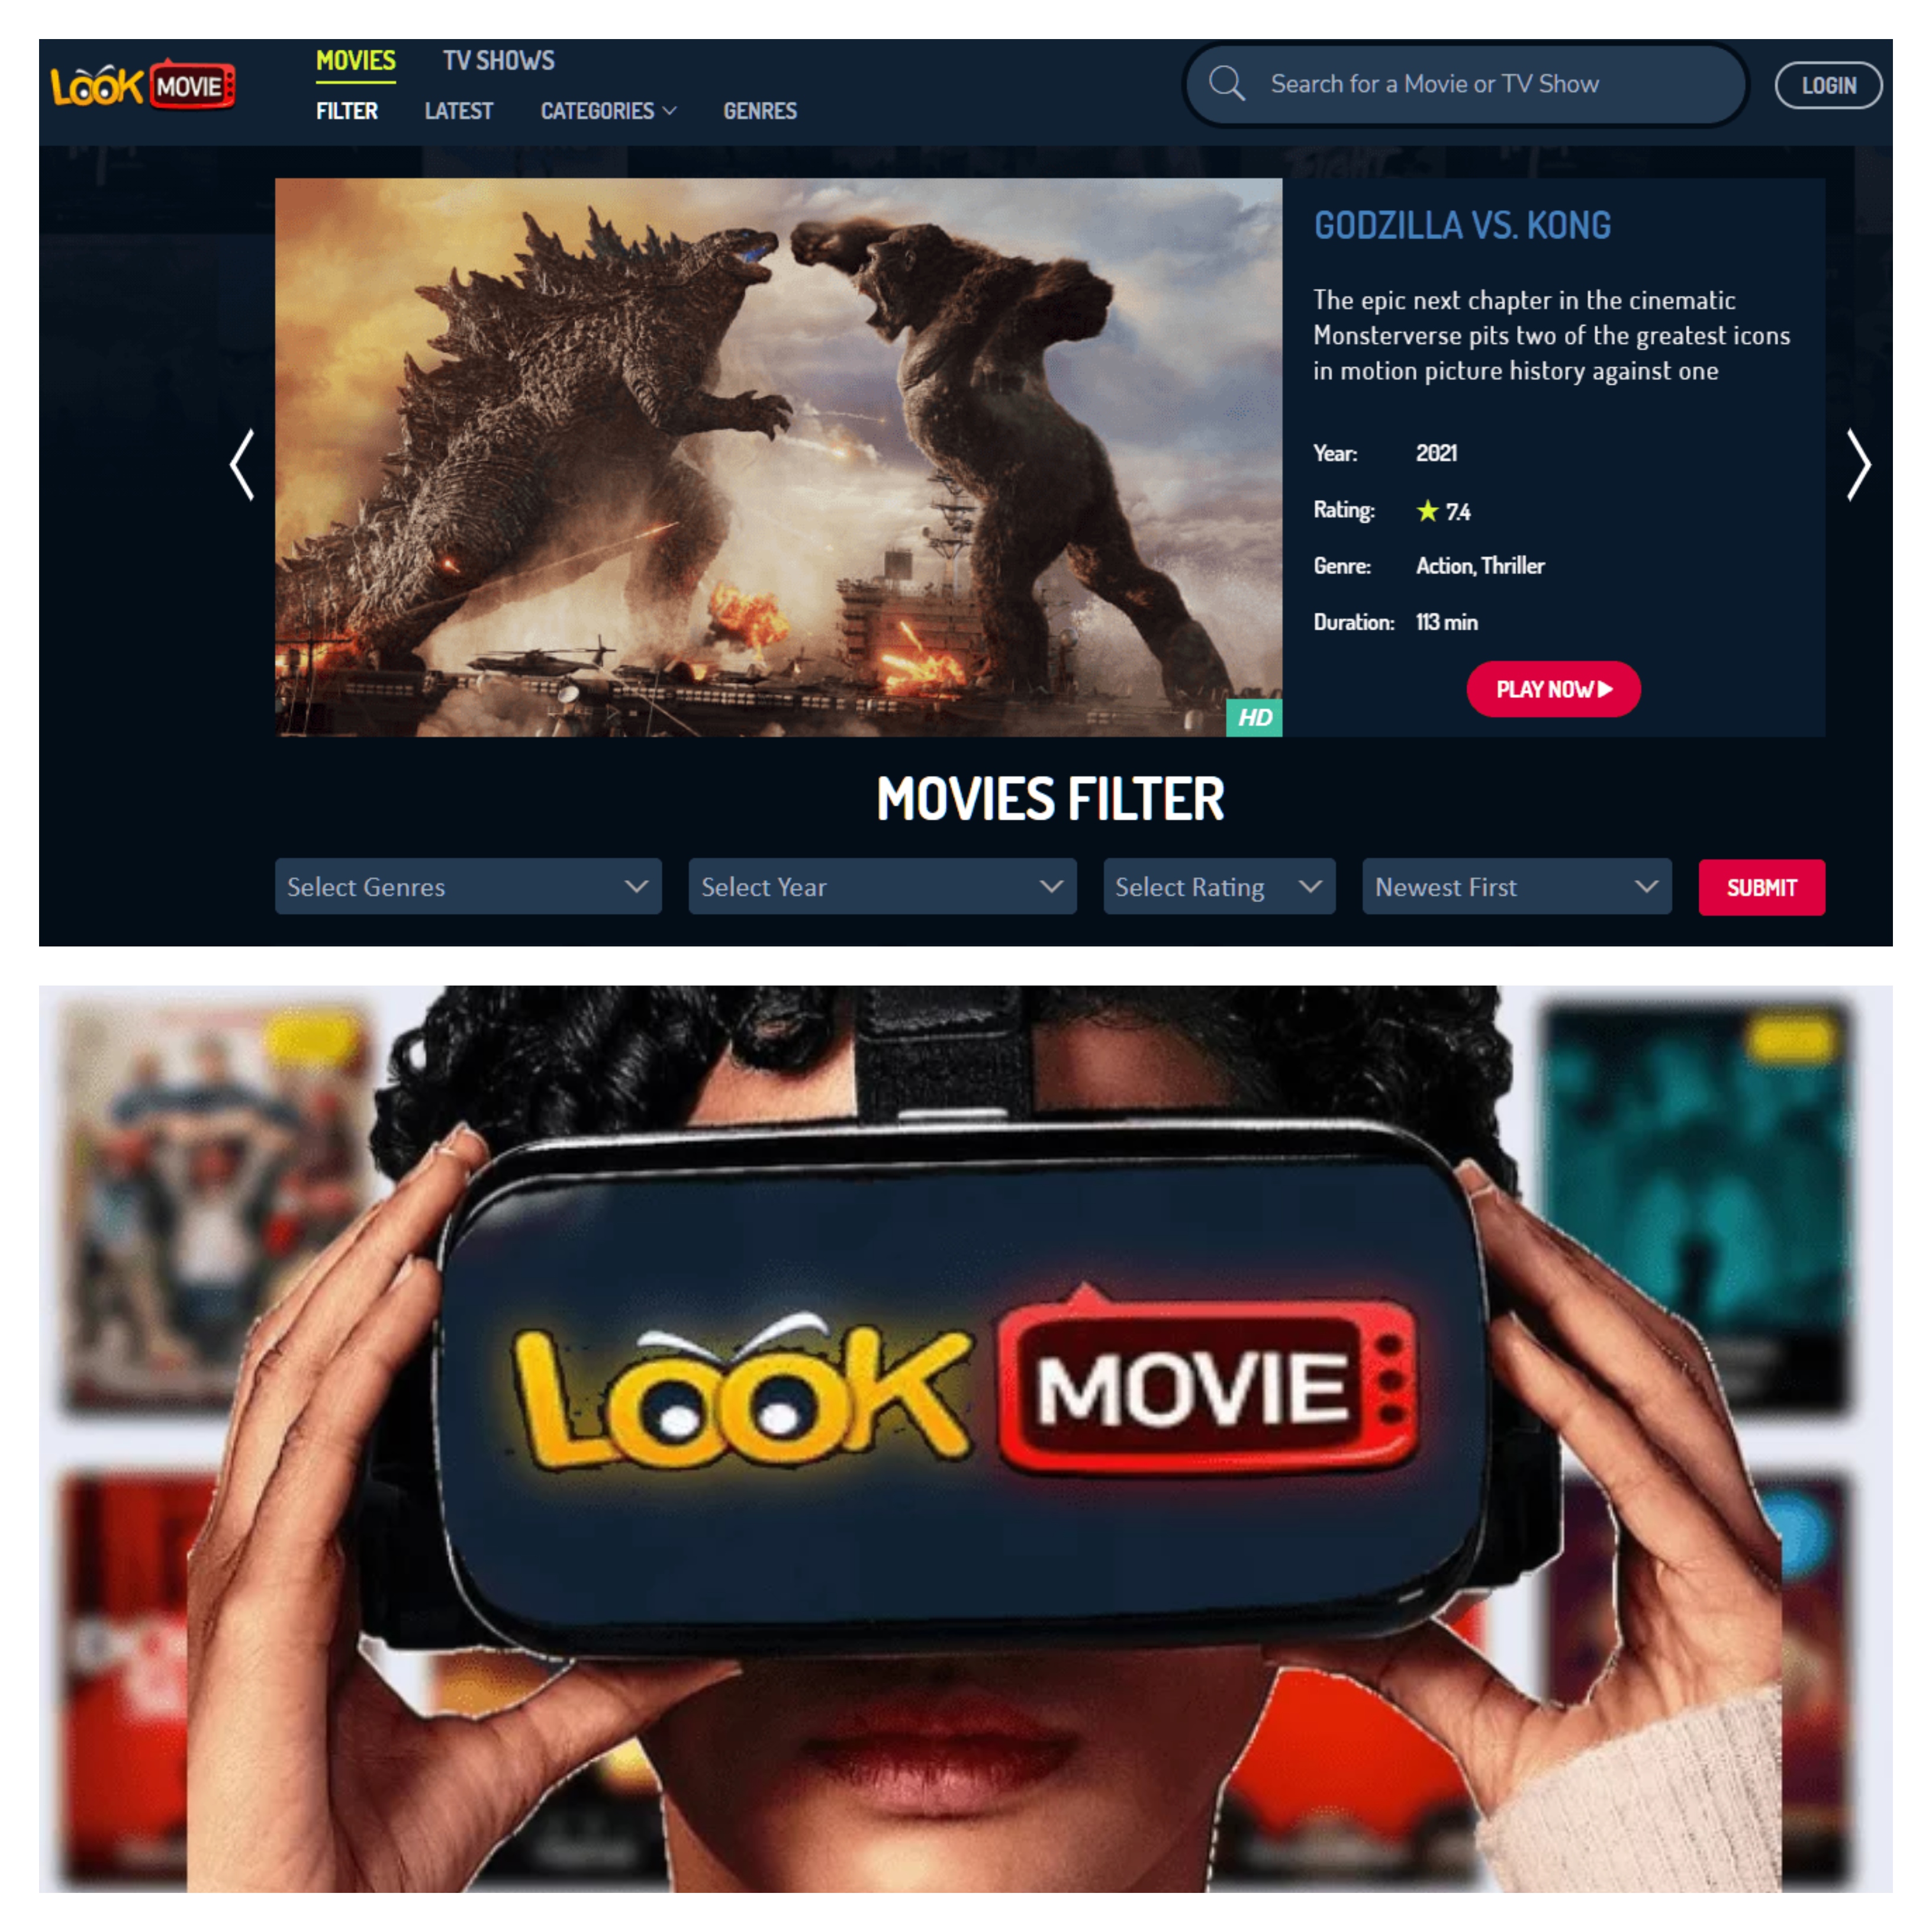 Screenshot of Lookmovie website; A girl holding a VR on which Lookmovie is written